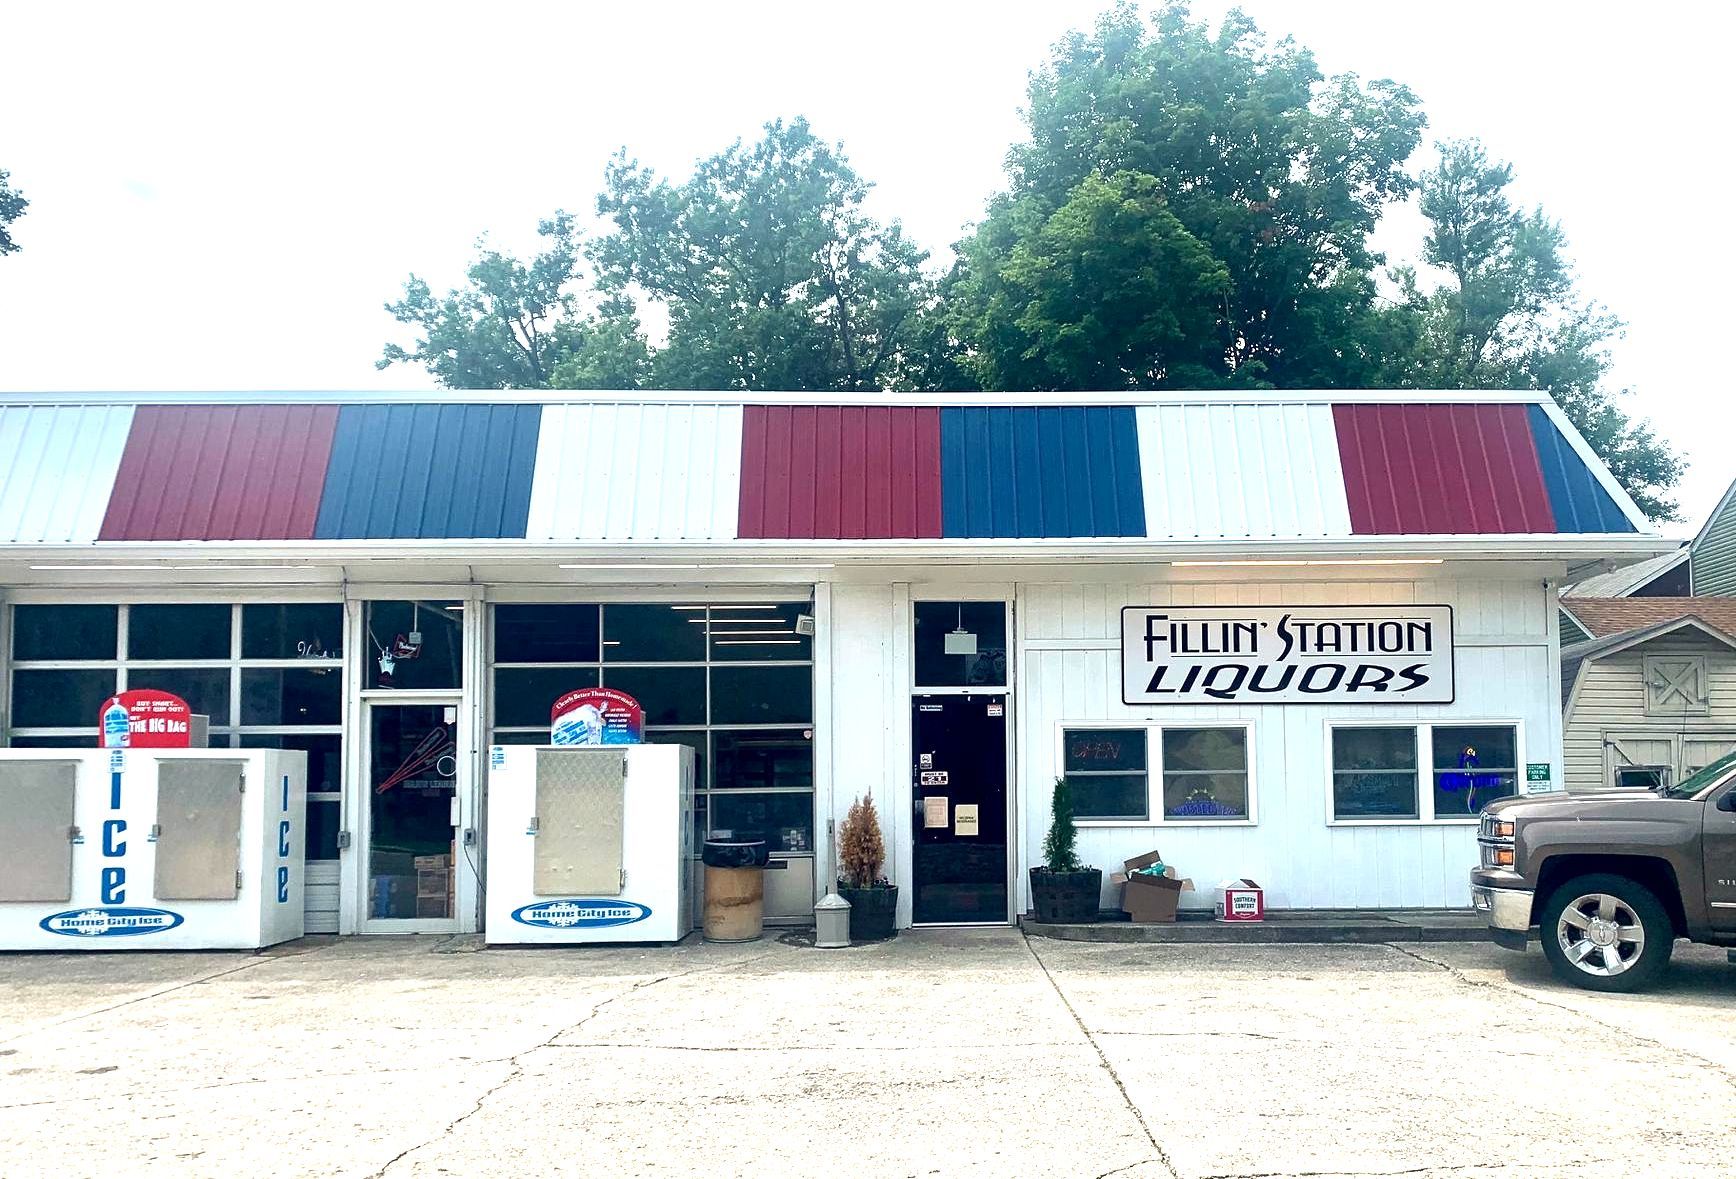 A fluid station liquor store with a red white and blue awning